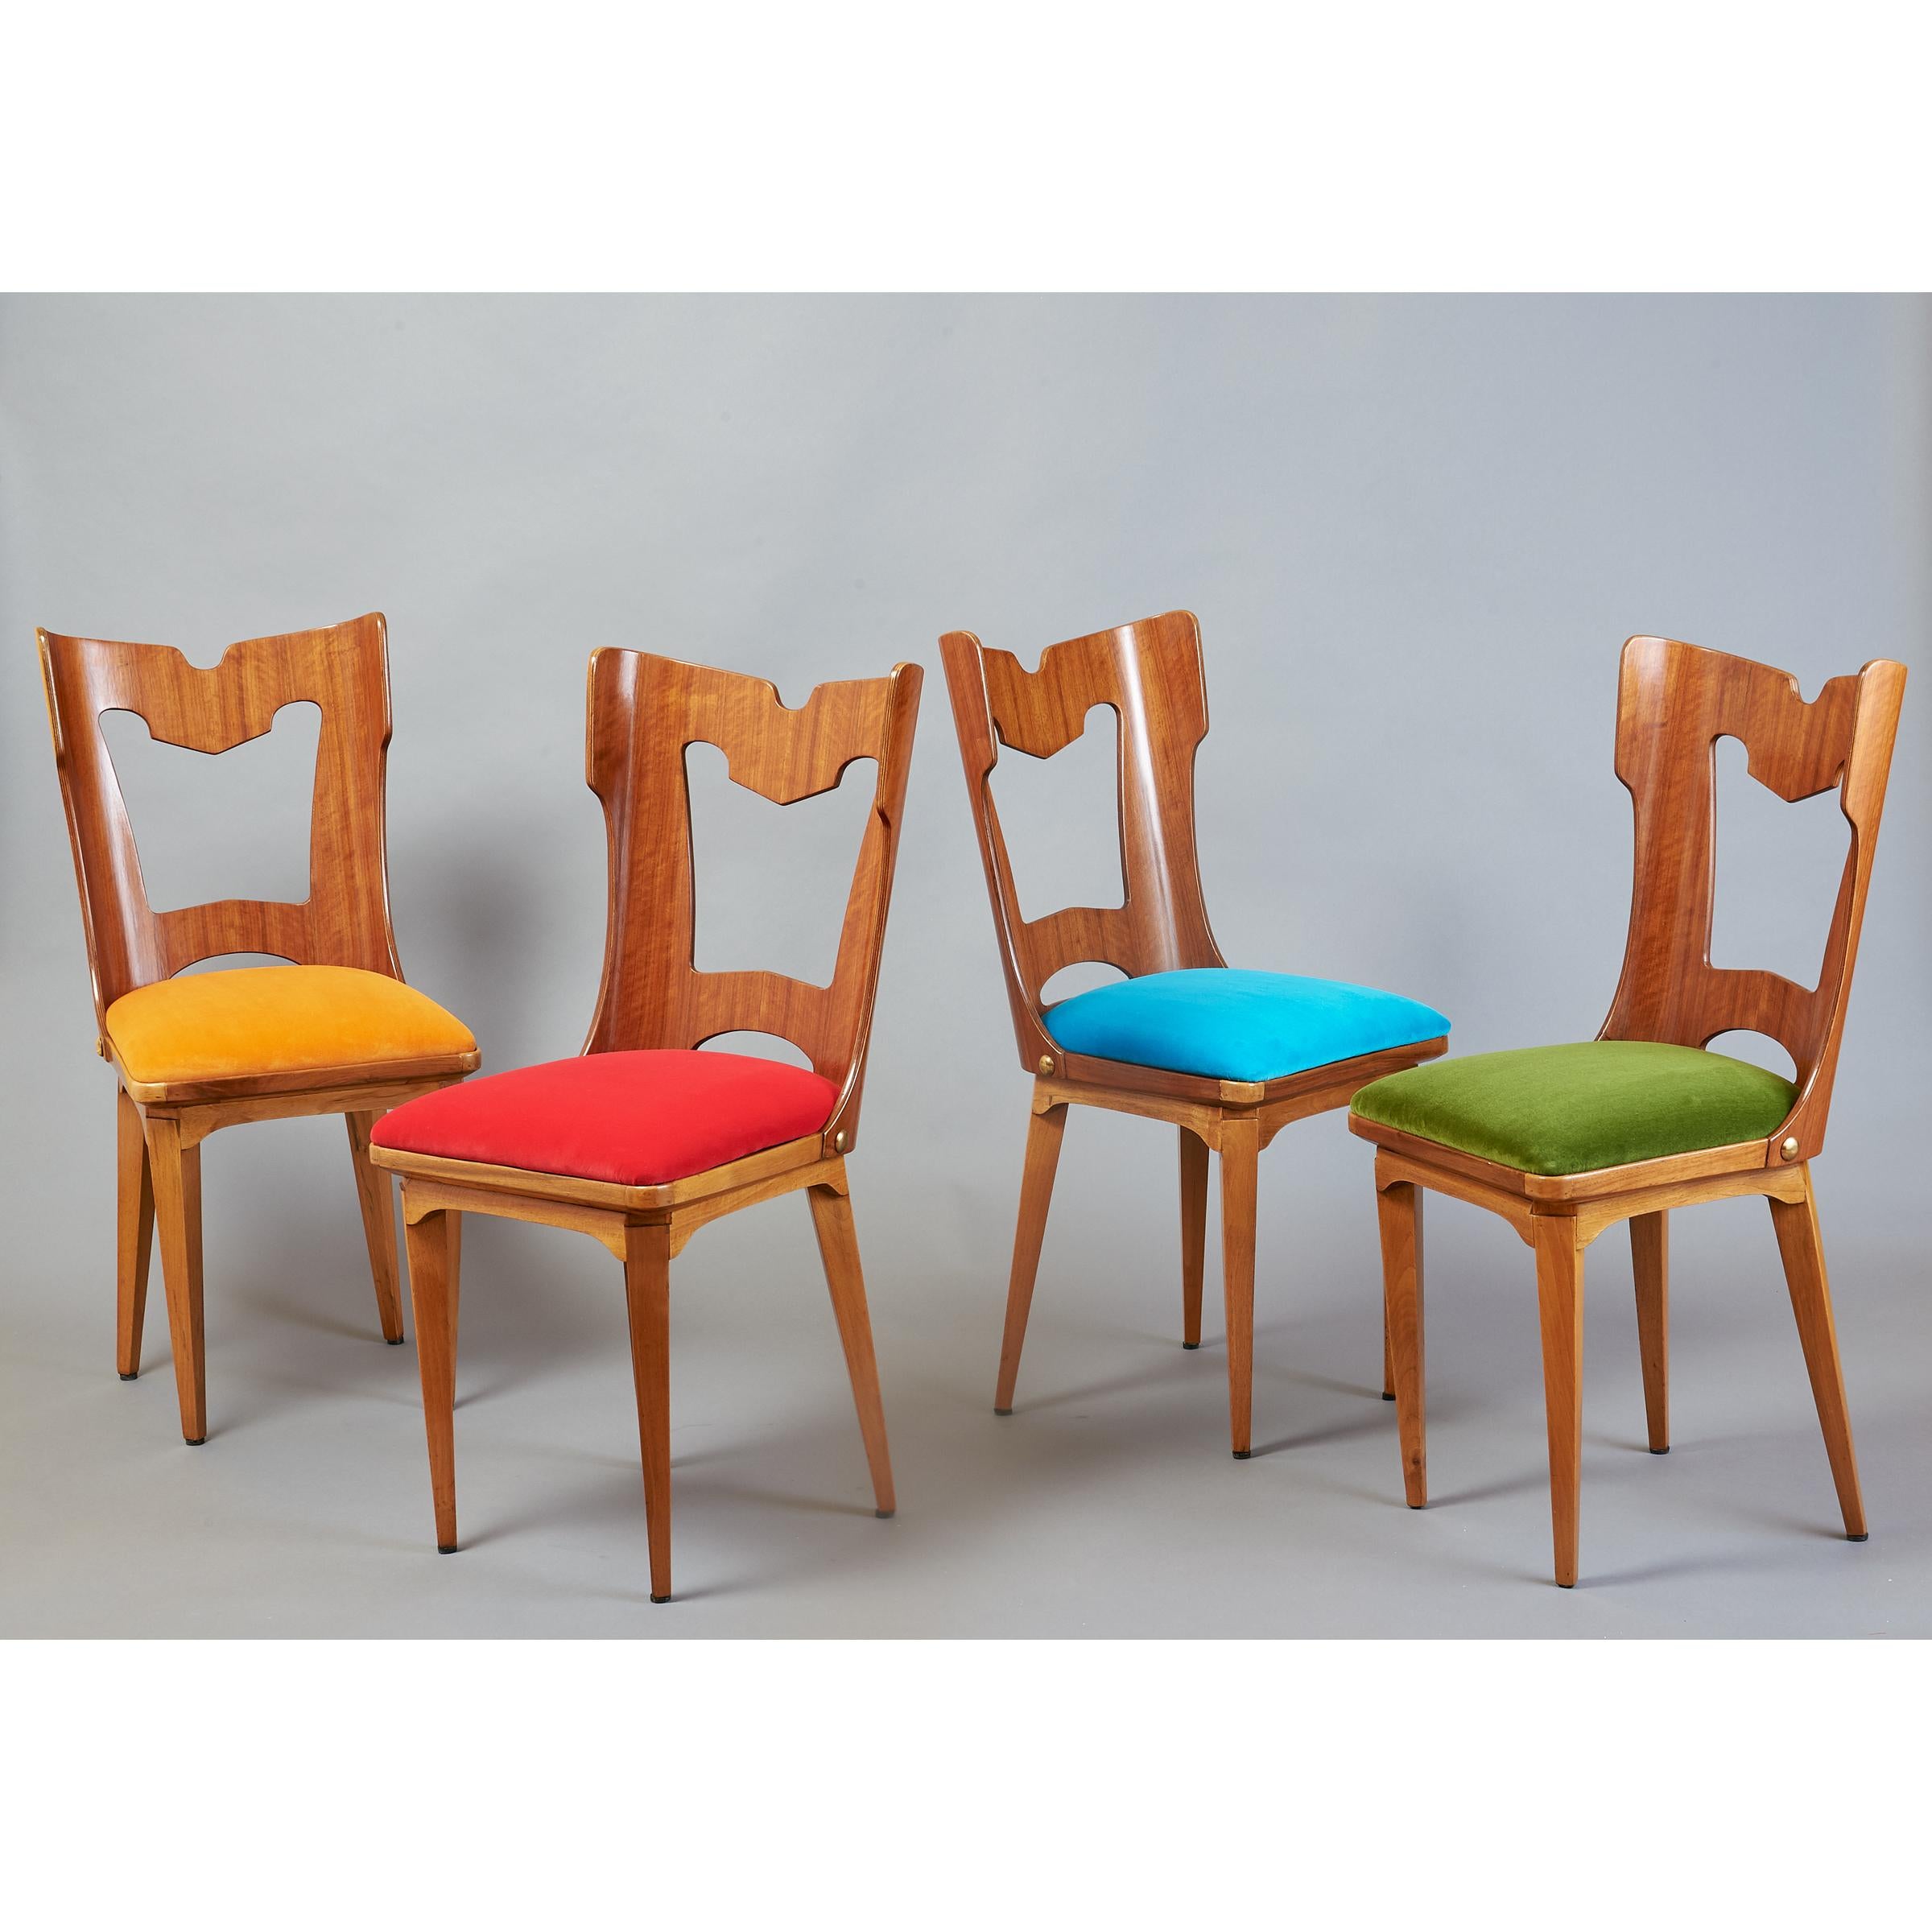 Italy, 1950s
A sculptural set of four chairs in the style of Borsani with curved and articulated walnut backs with elegant cut-outs.
Measure: 16 x 16 x 19 / 36 H.